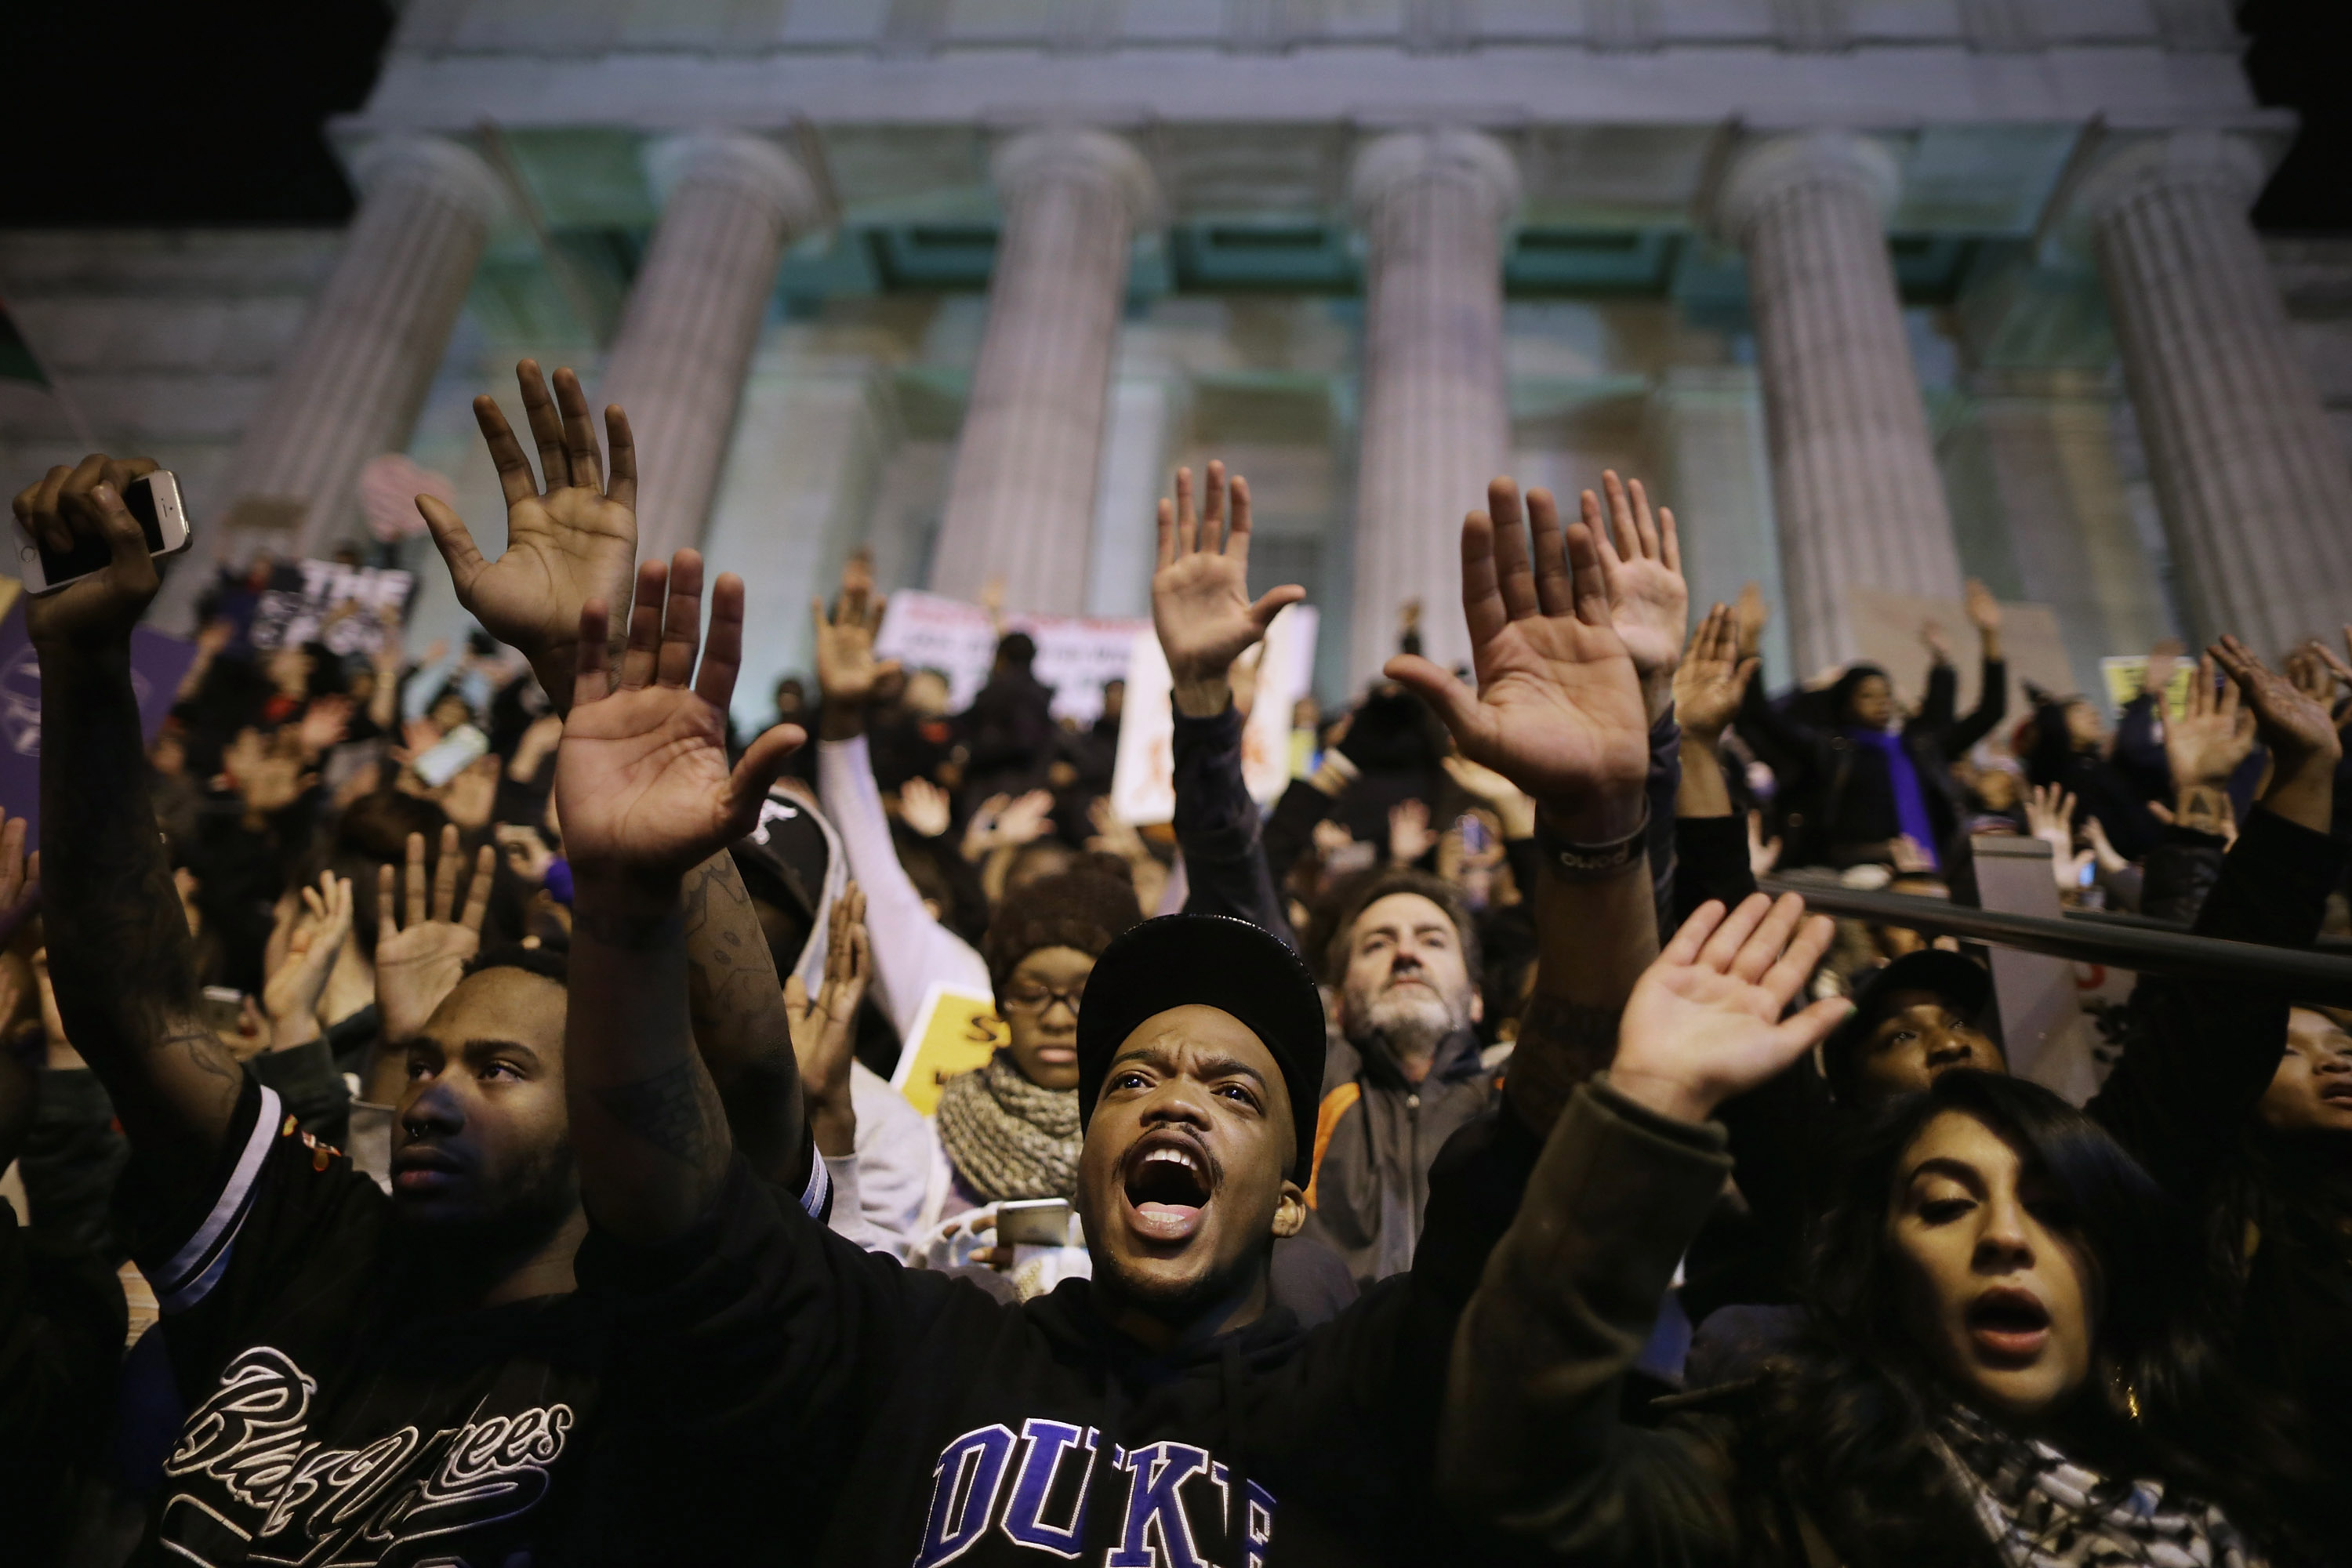 More than one thousand demonstrators chant "Hands up, don't shoot!" on the steps of the National Portrait Gallery in protest a day after the Ferguson grand jury decision to not indict officer Darren Wilson in the Michael Brown case November 25, 2014 in Washington, DC. (Chip Somodevilla&mdash;Getty Images)